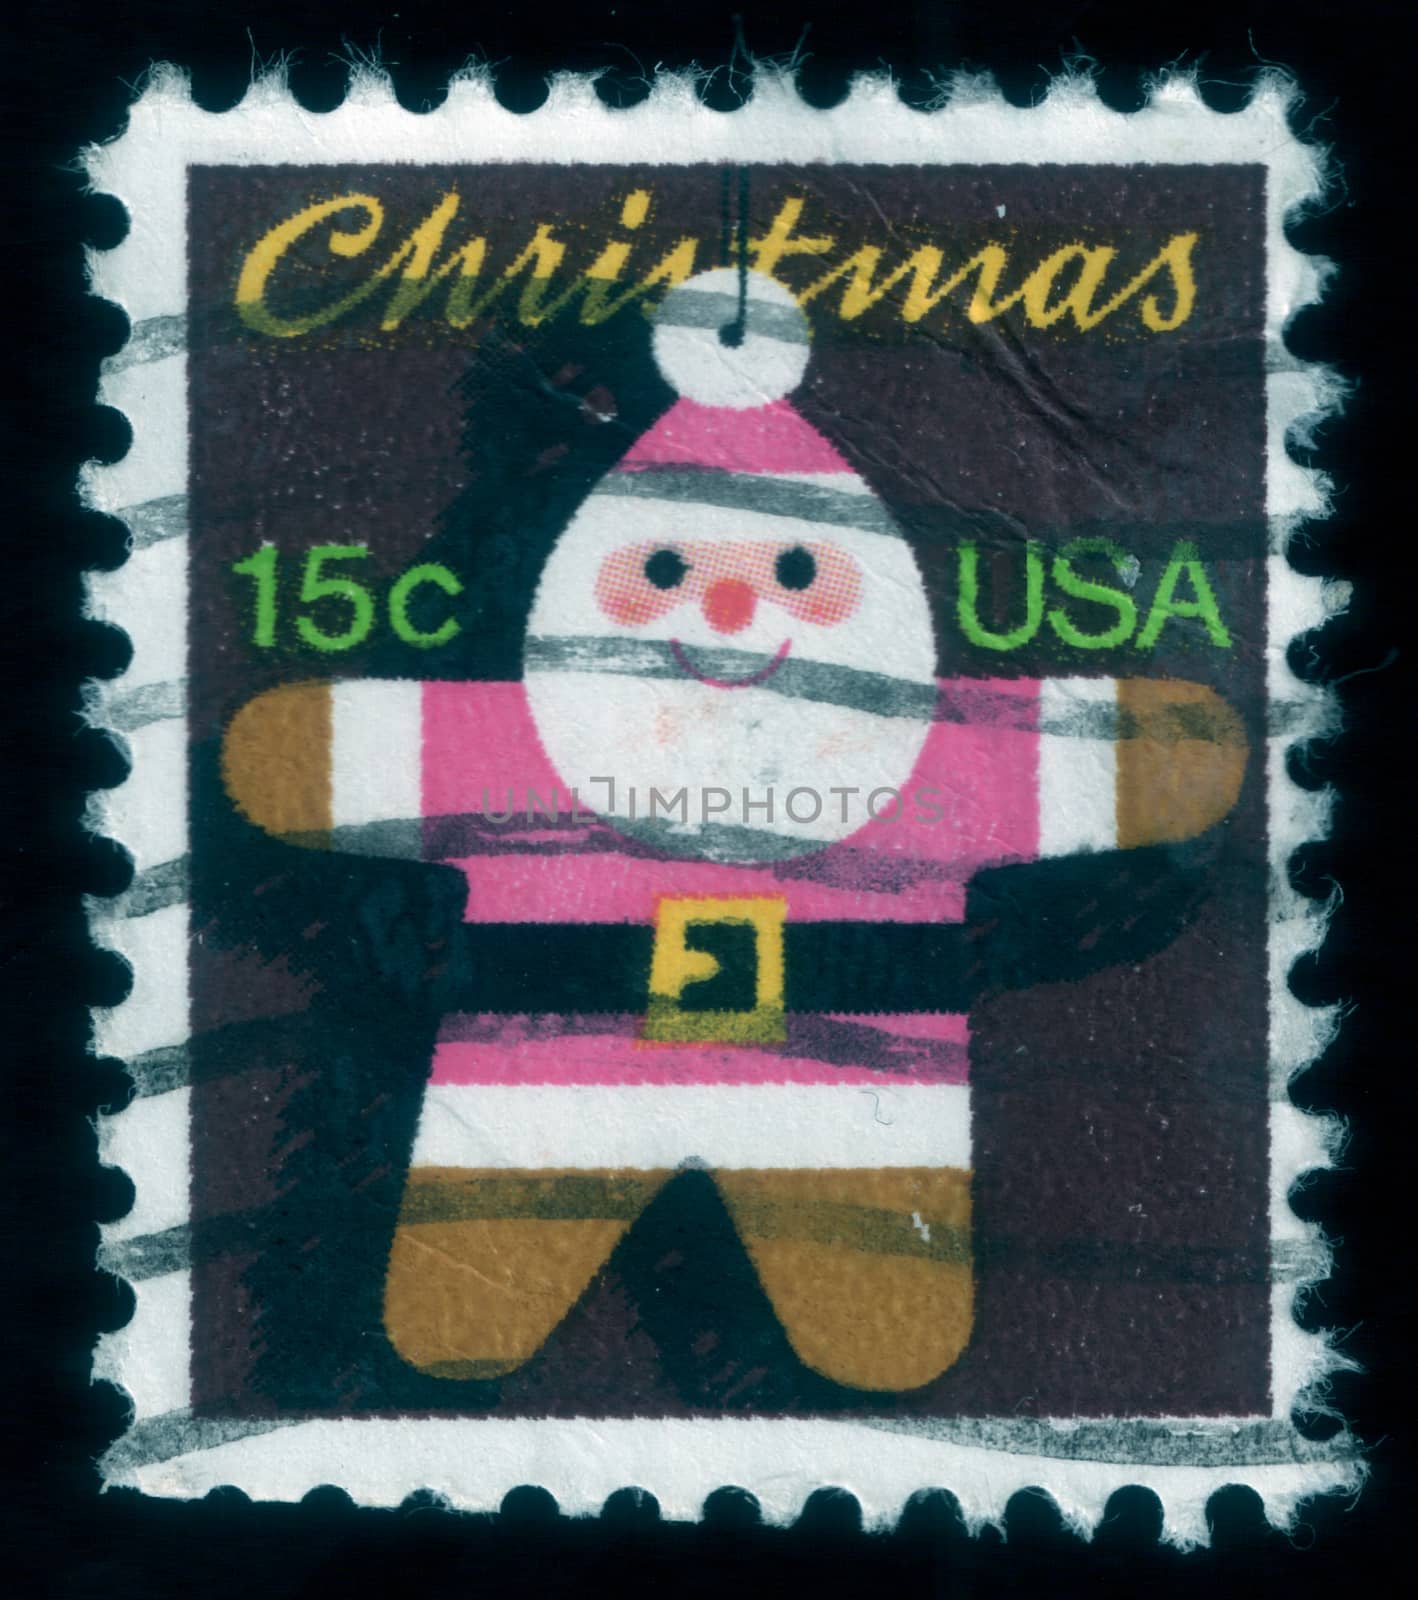 Father Christmas Postage Stamp by madfoto